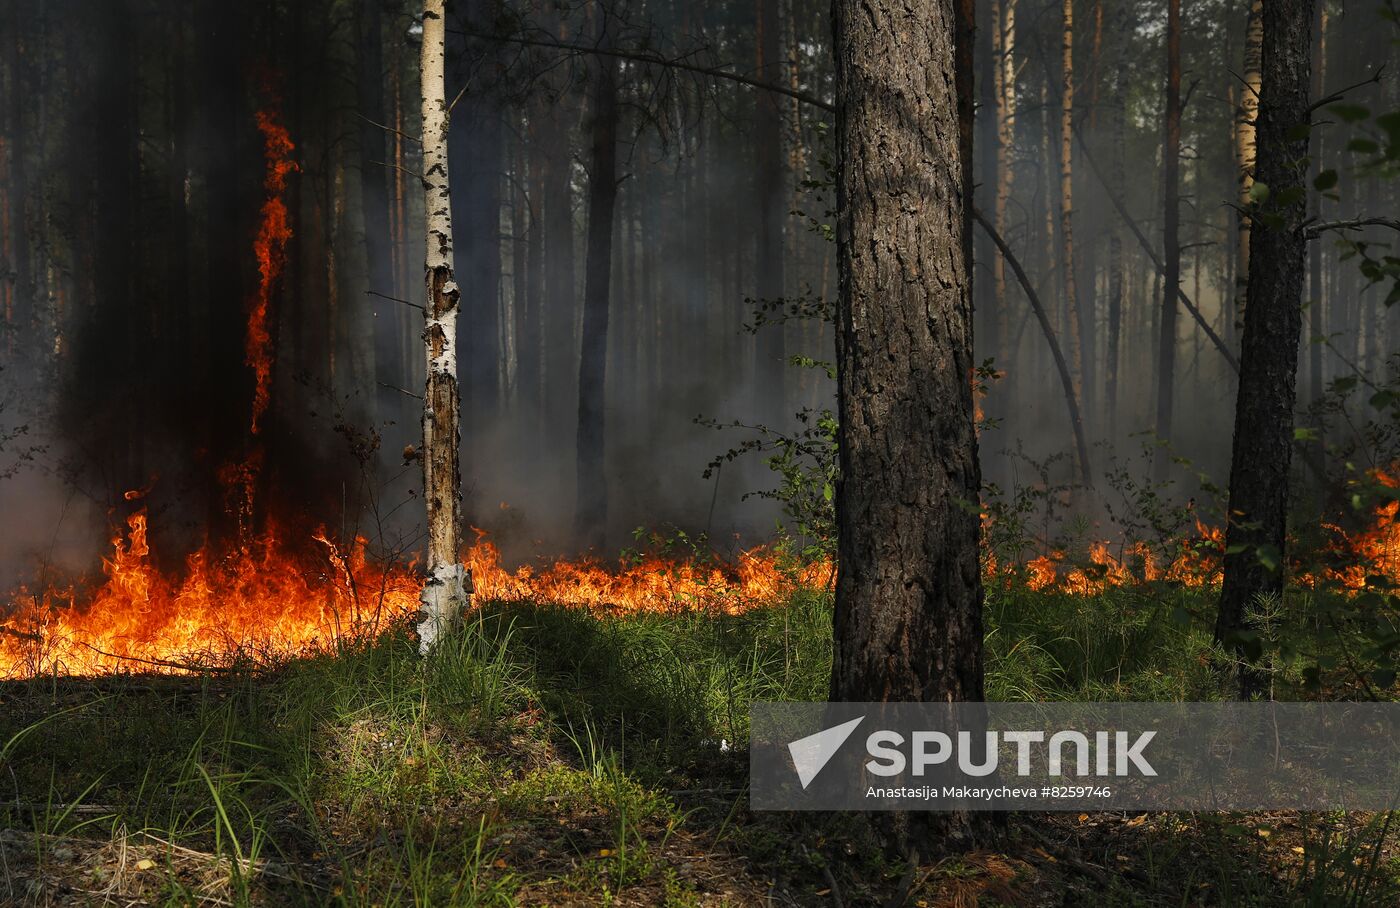 Russia Wildfires